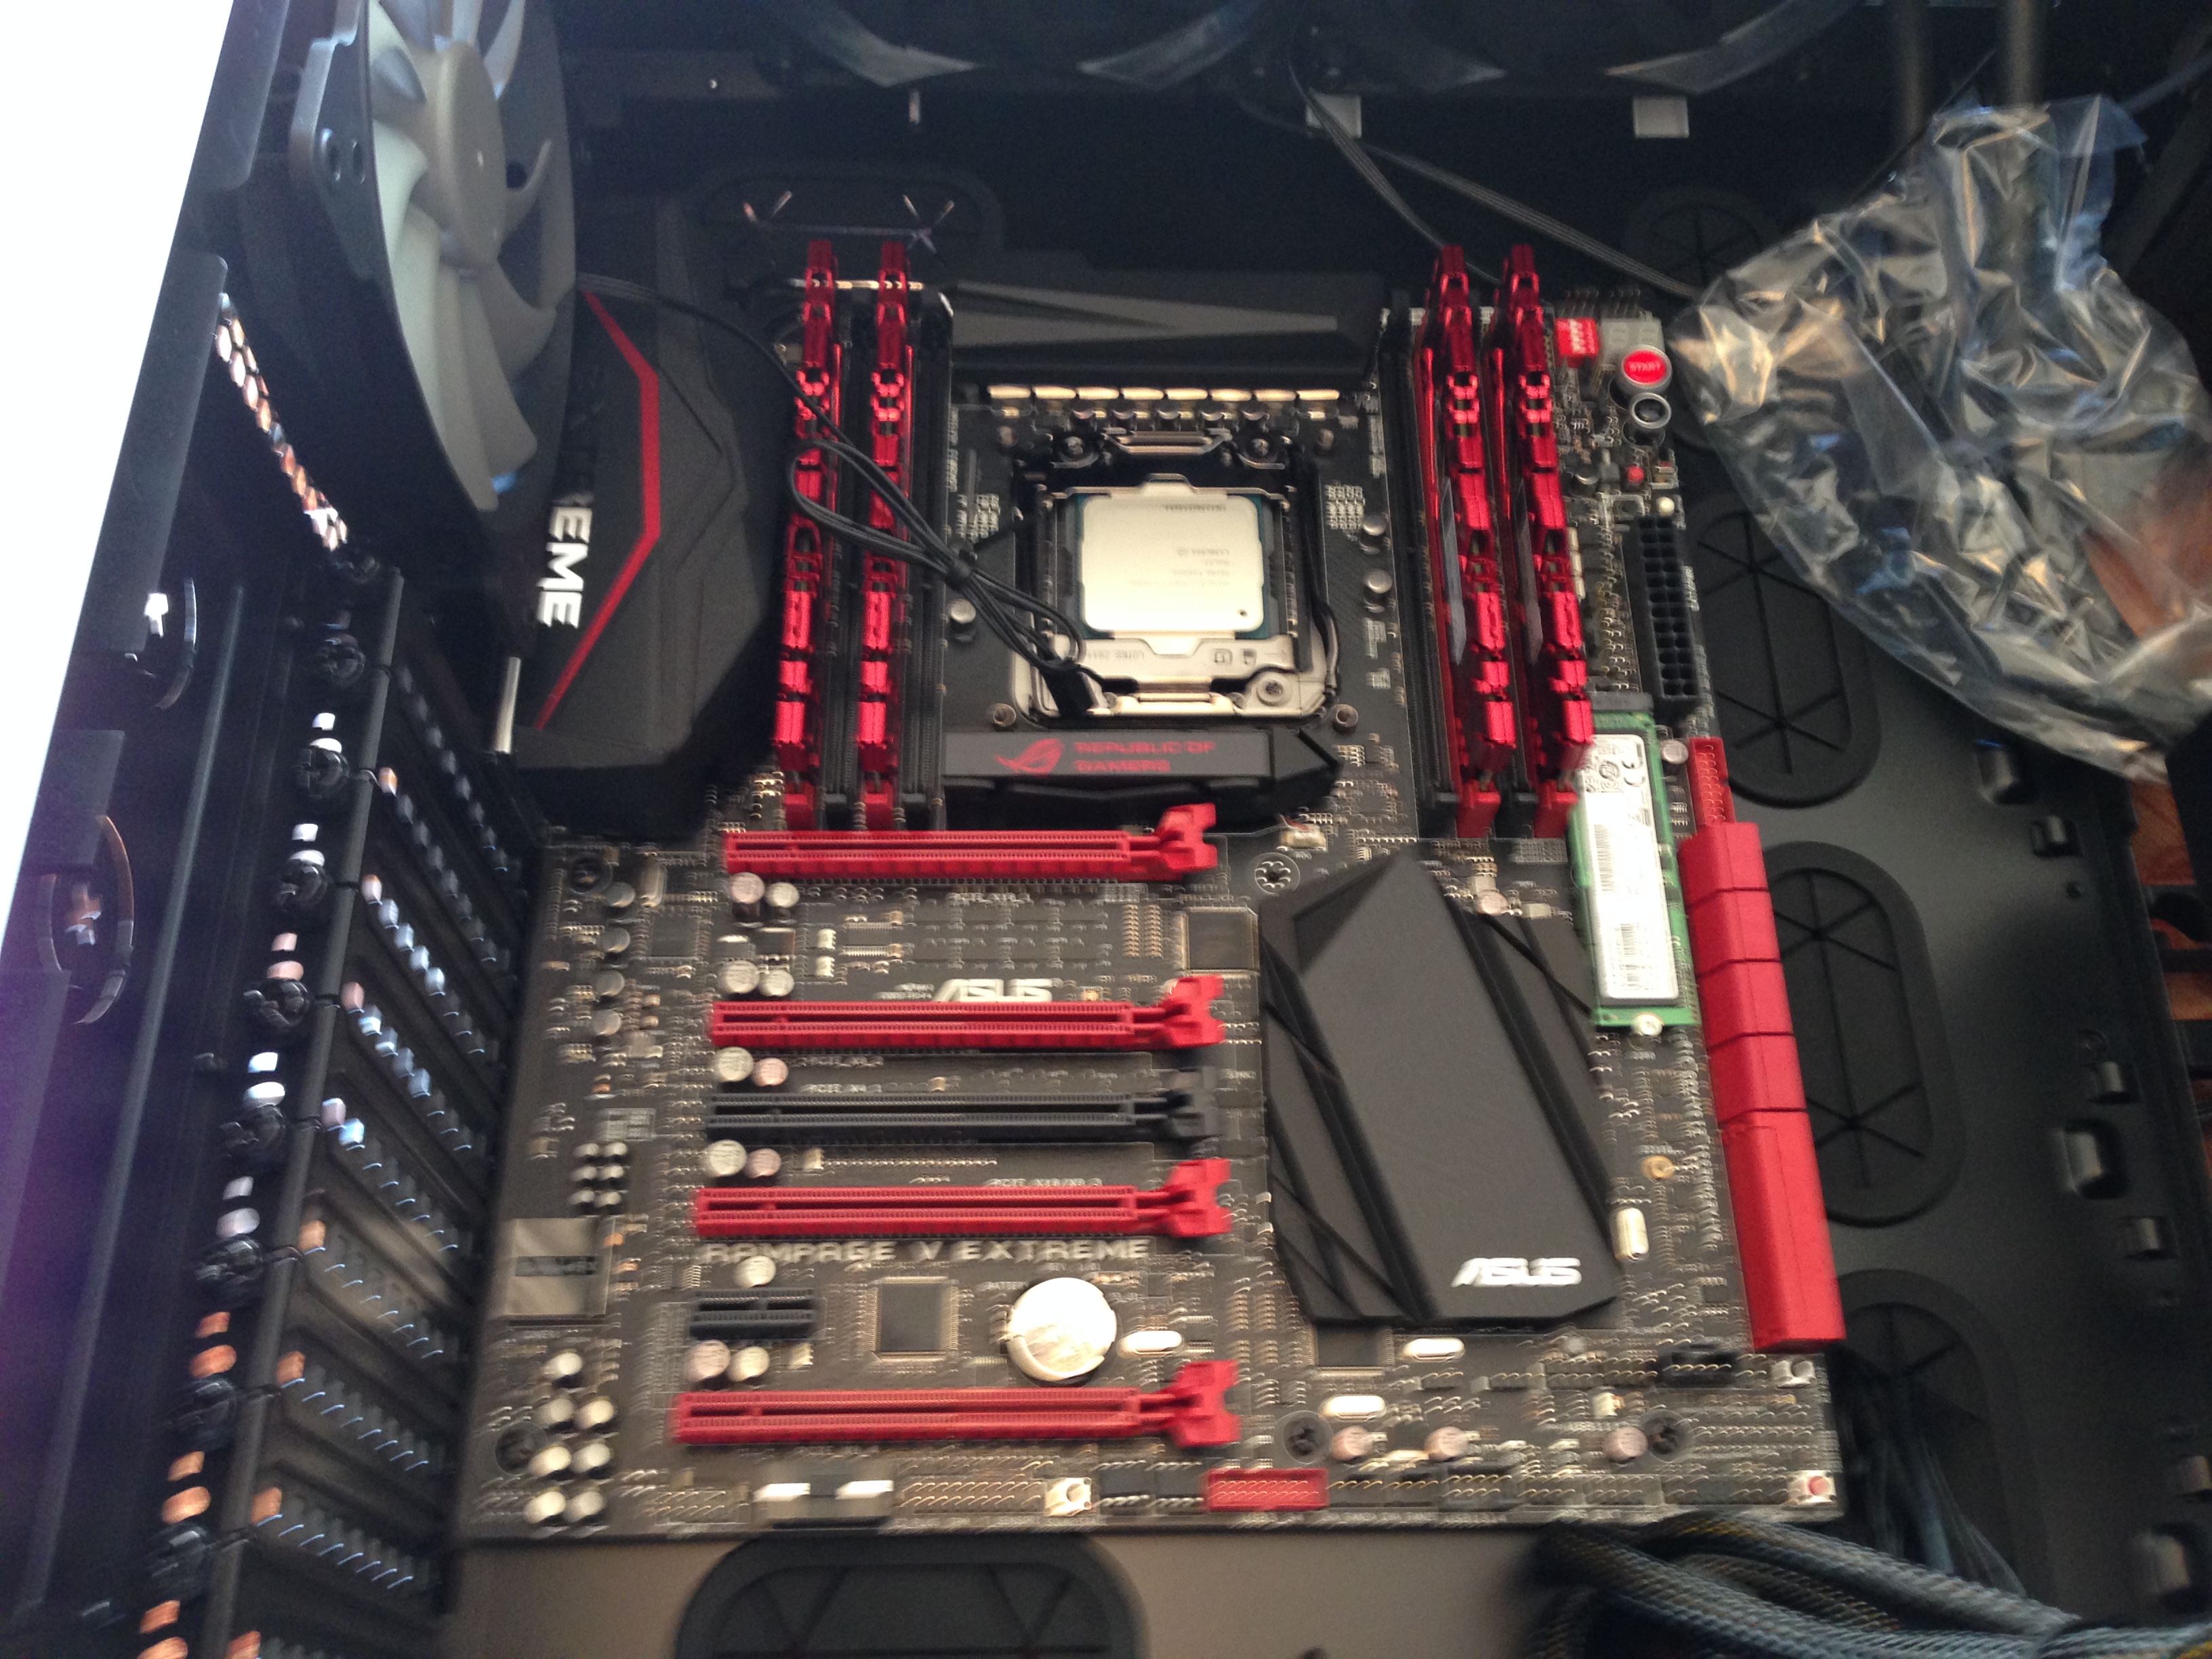 Motherboard installed in case